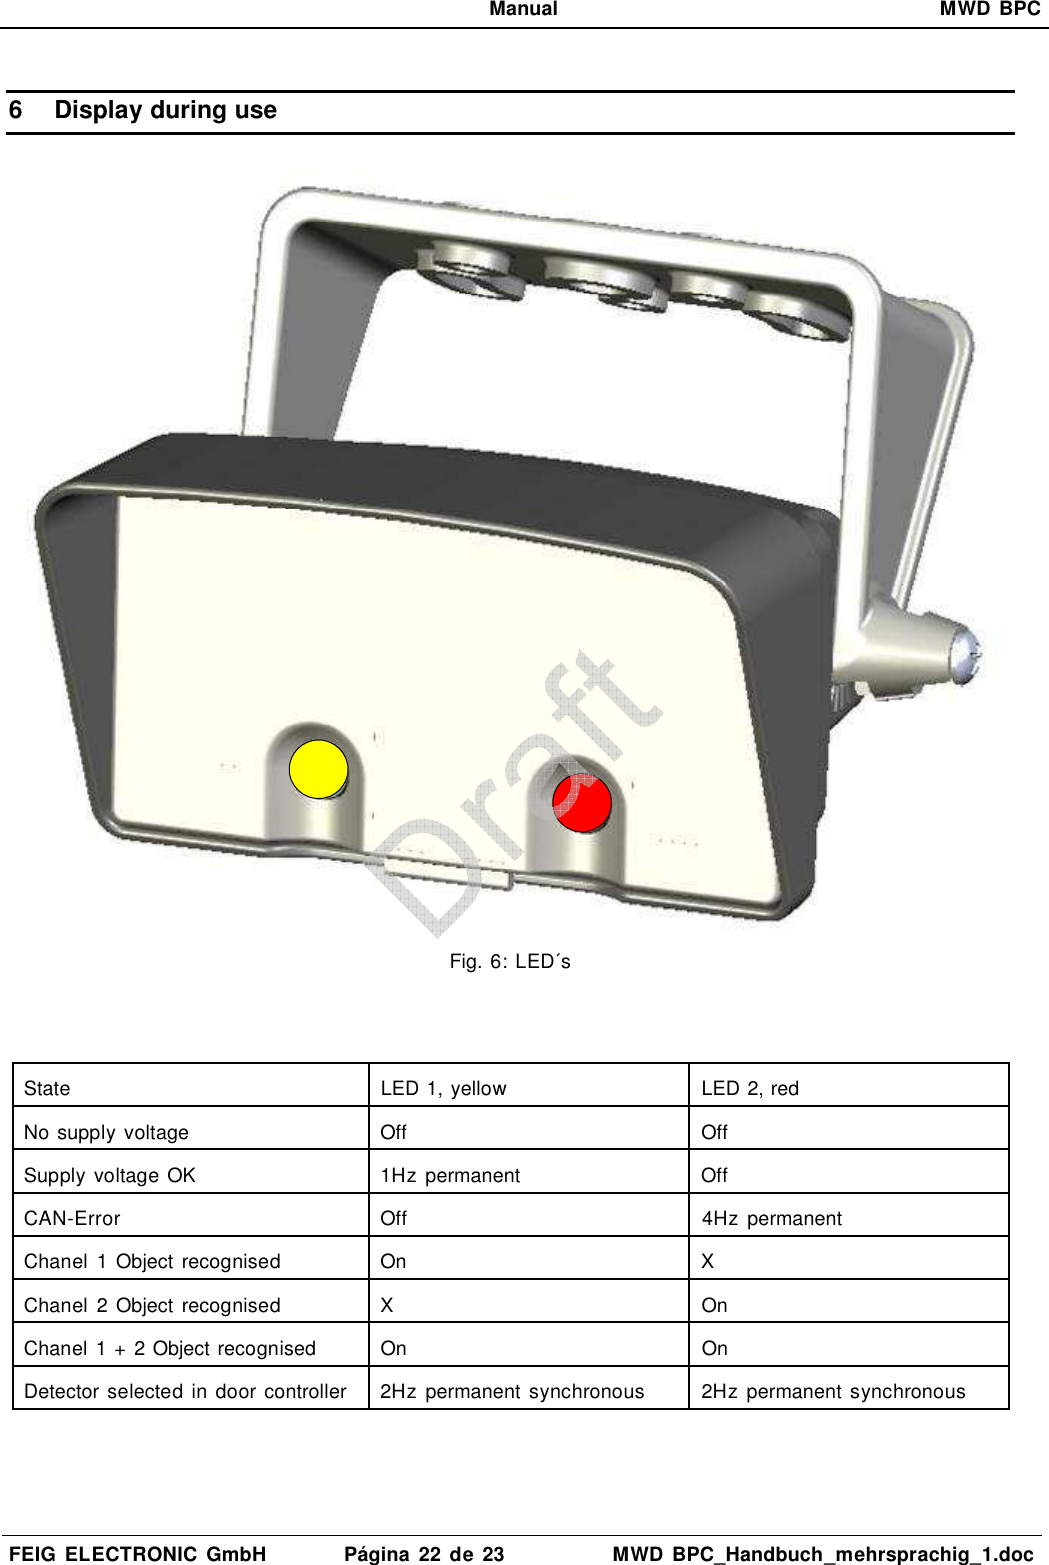   Manual  MWD  BPC  FEIG  ELECTRONIC  GmbH  Página  22  de  23  MWD  BPC_Handbuch_mehrsprachig_1.doc  6  Display during use  Fig. 6: LED´s    State  LED 1, yellow  LED 2, red No supply voltage Off  Off Supply voltage OK 1Hz  permanent  Off CAN-Error Off  4Hz  permanent Chanel  1  Object  recognised On  X Chanel  2  Object  recognised X  On Chanel  1 + 2 Object recognised On  On Detector  selected in door controller 2Hz  permanent  synchronous  2Hz  permanent  synchronous     